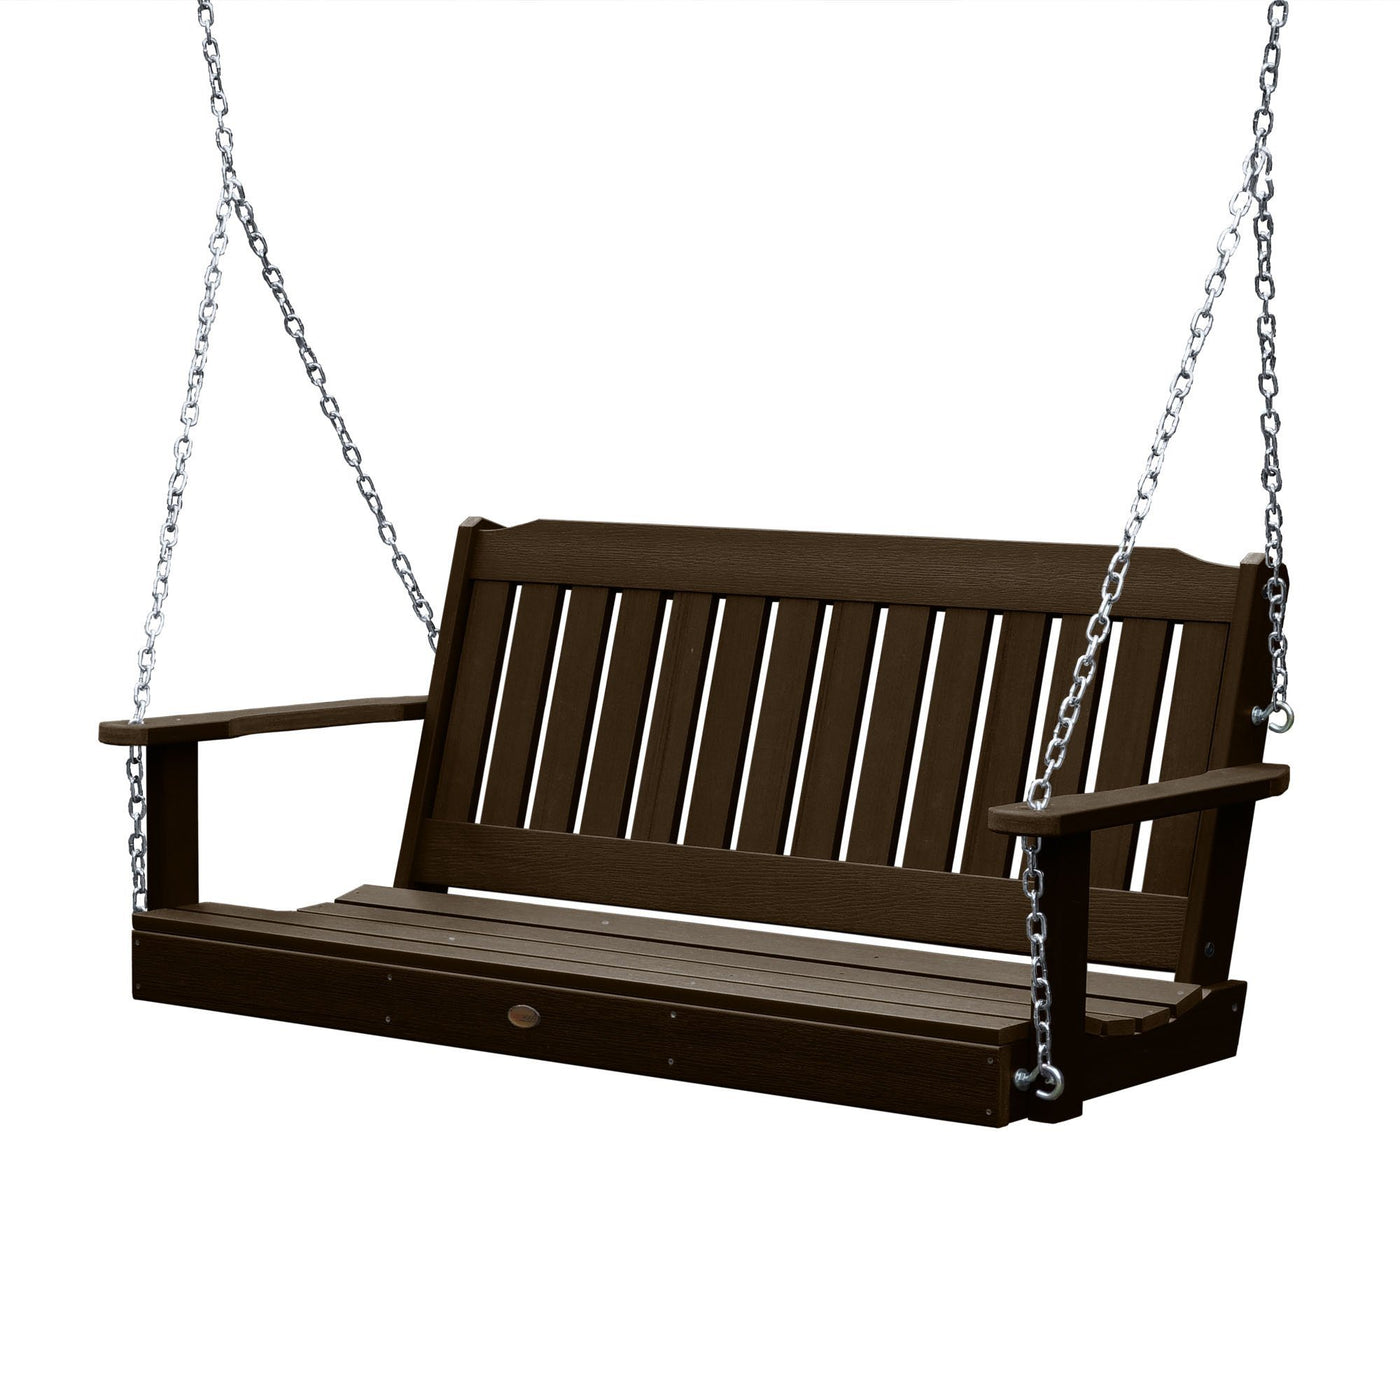 Lehigh Porch Swing - 5ft BenchSwing Highwood USA Weathered Acorn 